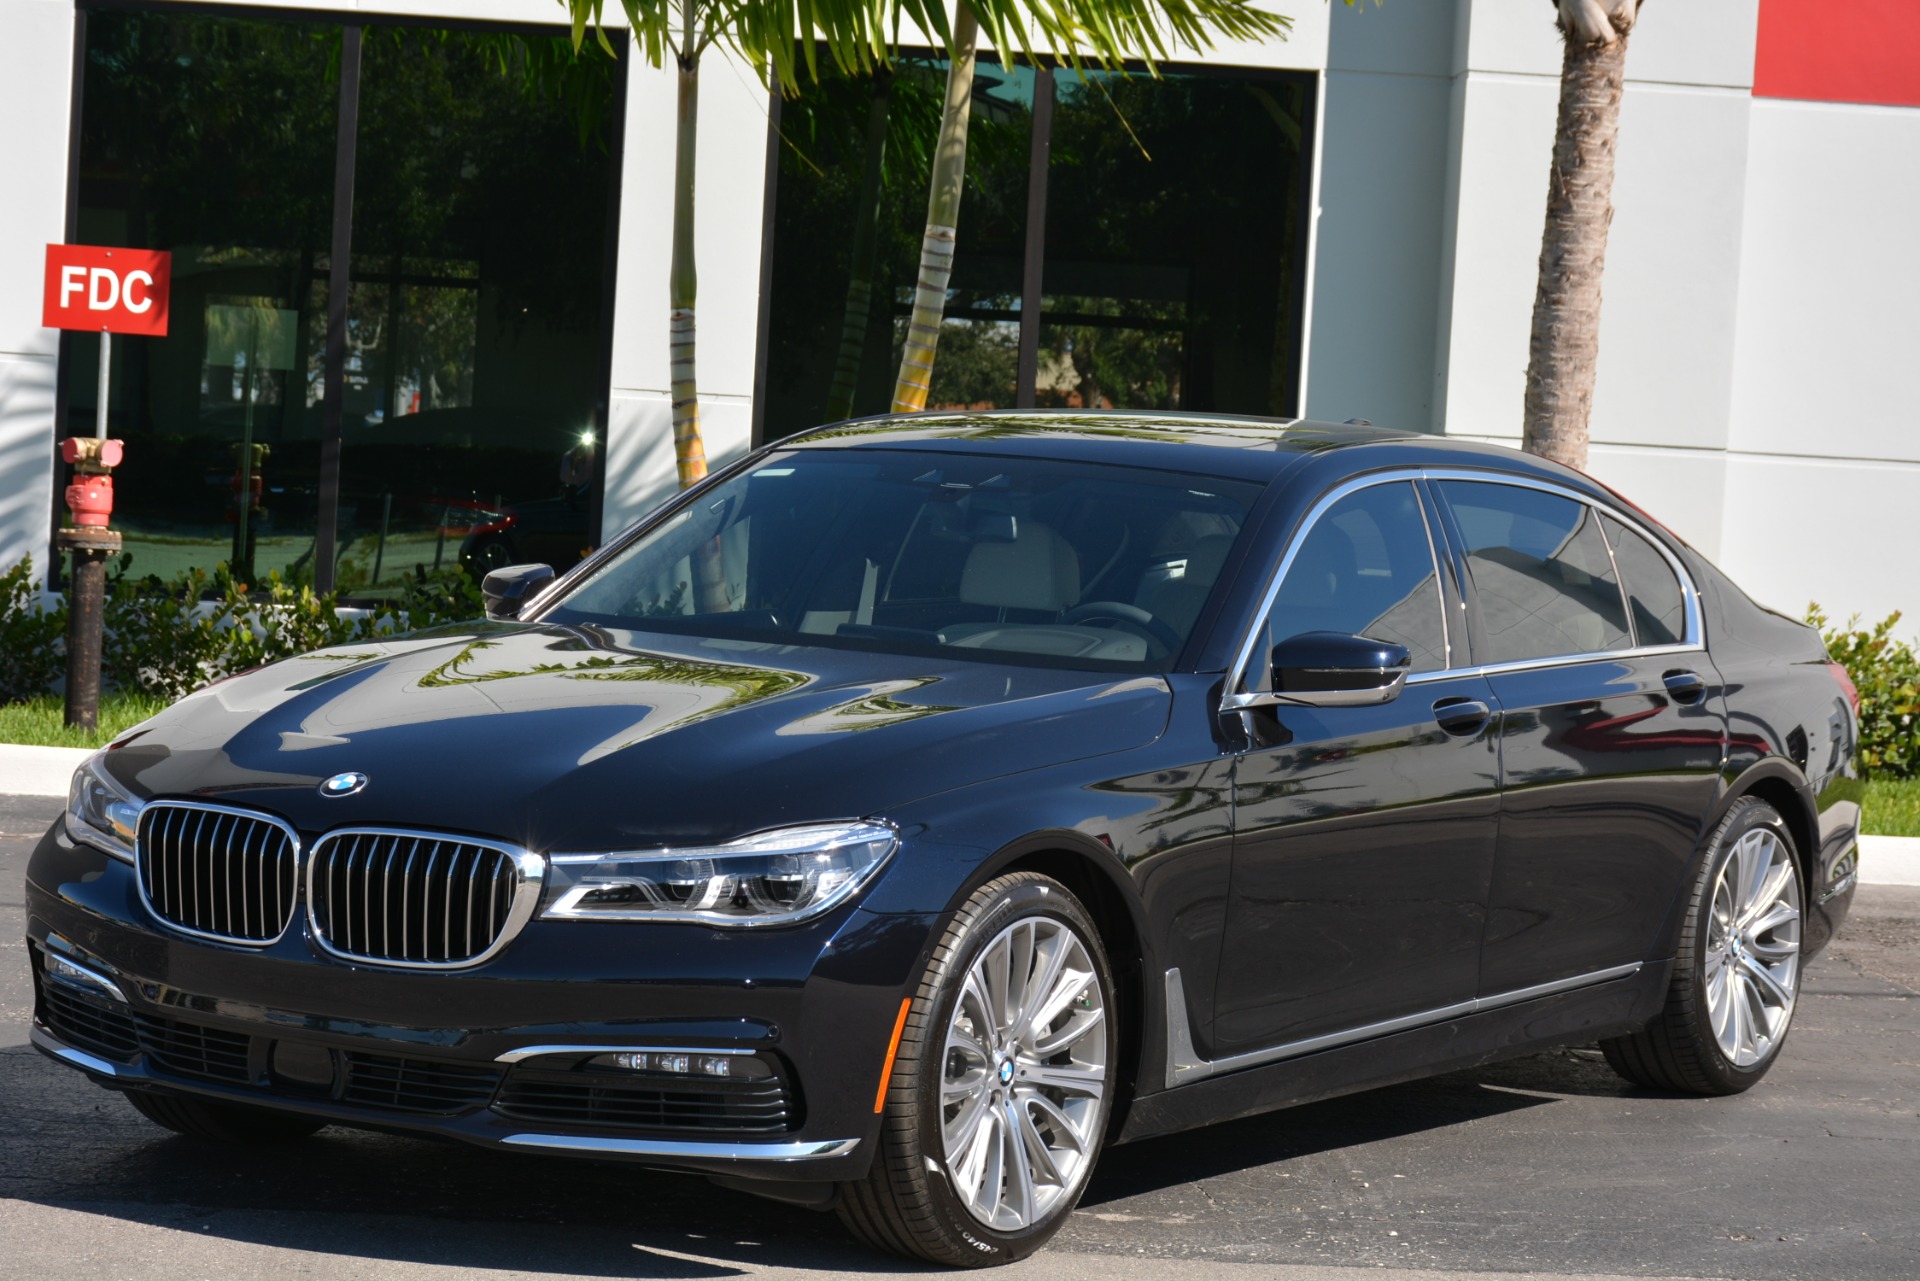 Used 2018 BMW 7 Series 750i For Sale ($94,900) | Marino Performance ...